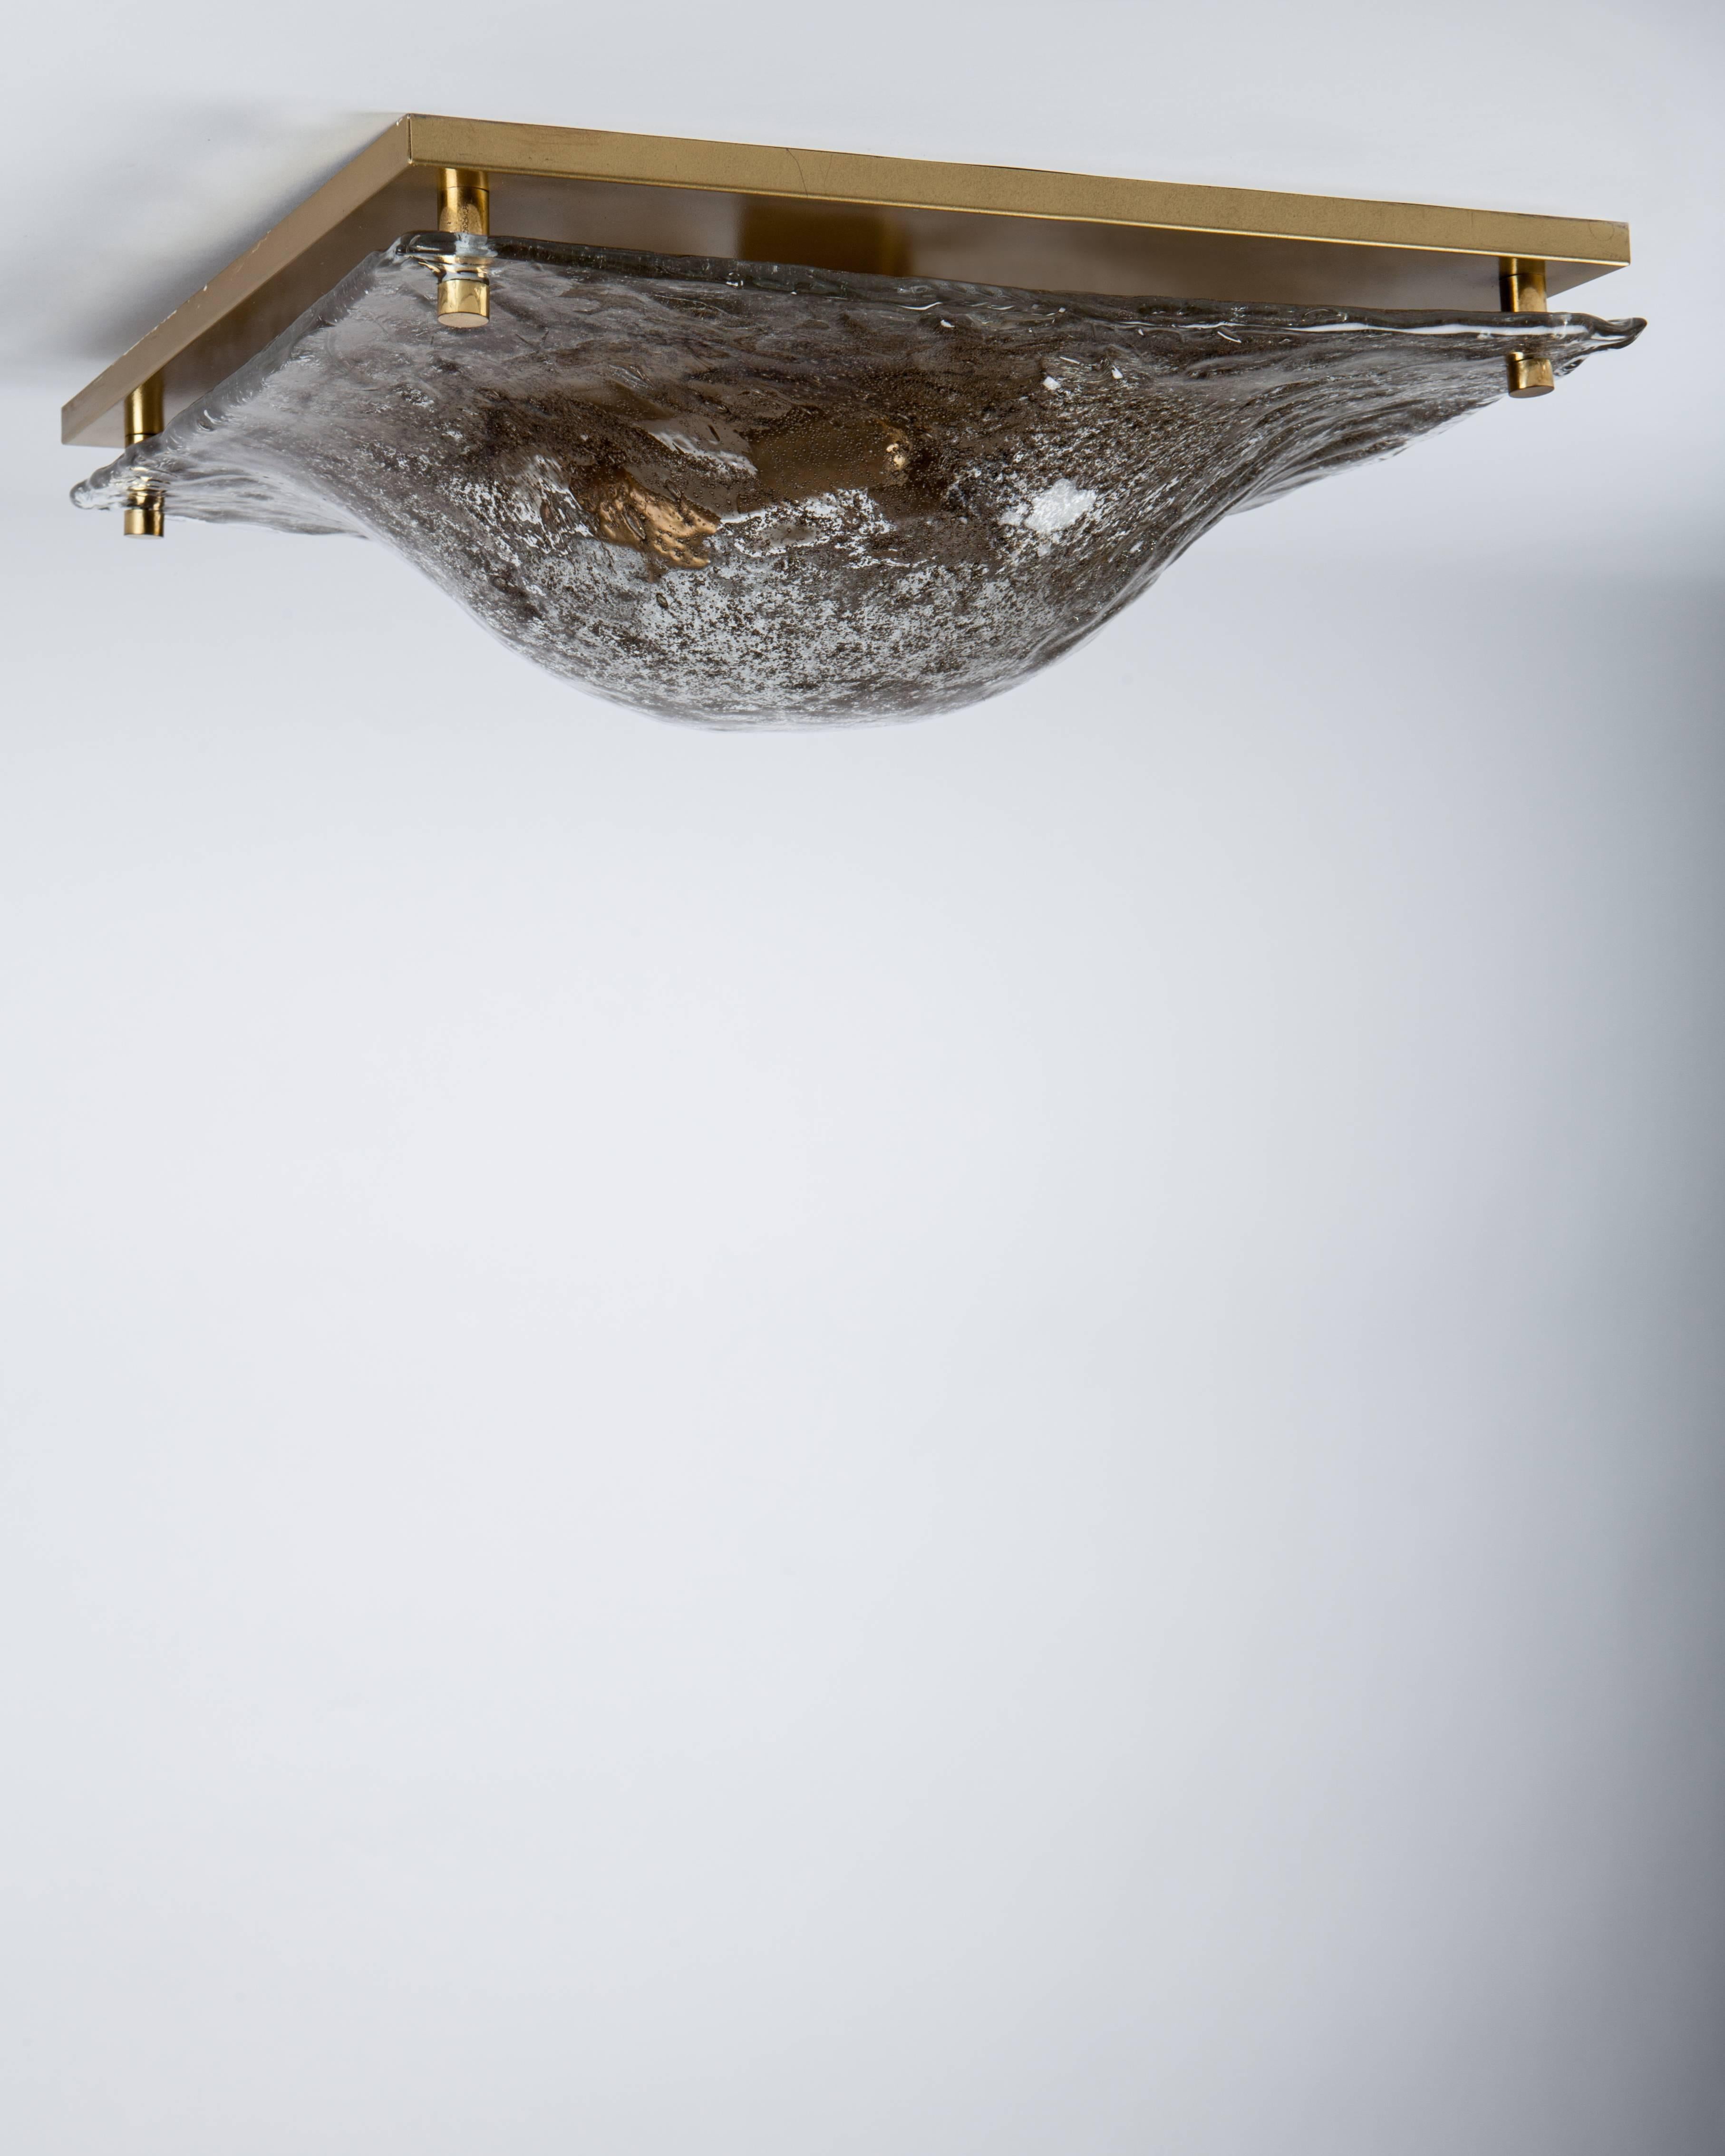 AHL3976.
A large square flush mount with a heavily-seeded and textured clear-to-smoke glass lens and aged brass fittings. This mid century modern fixture is by the German maker Kaiser Leuchten. Due to the antique nature of this fixture, there may